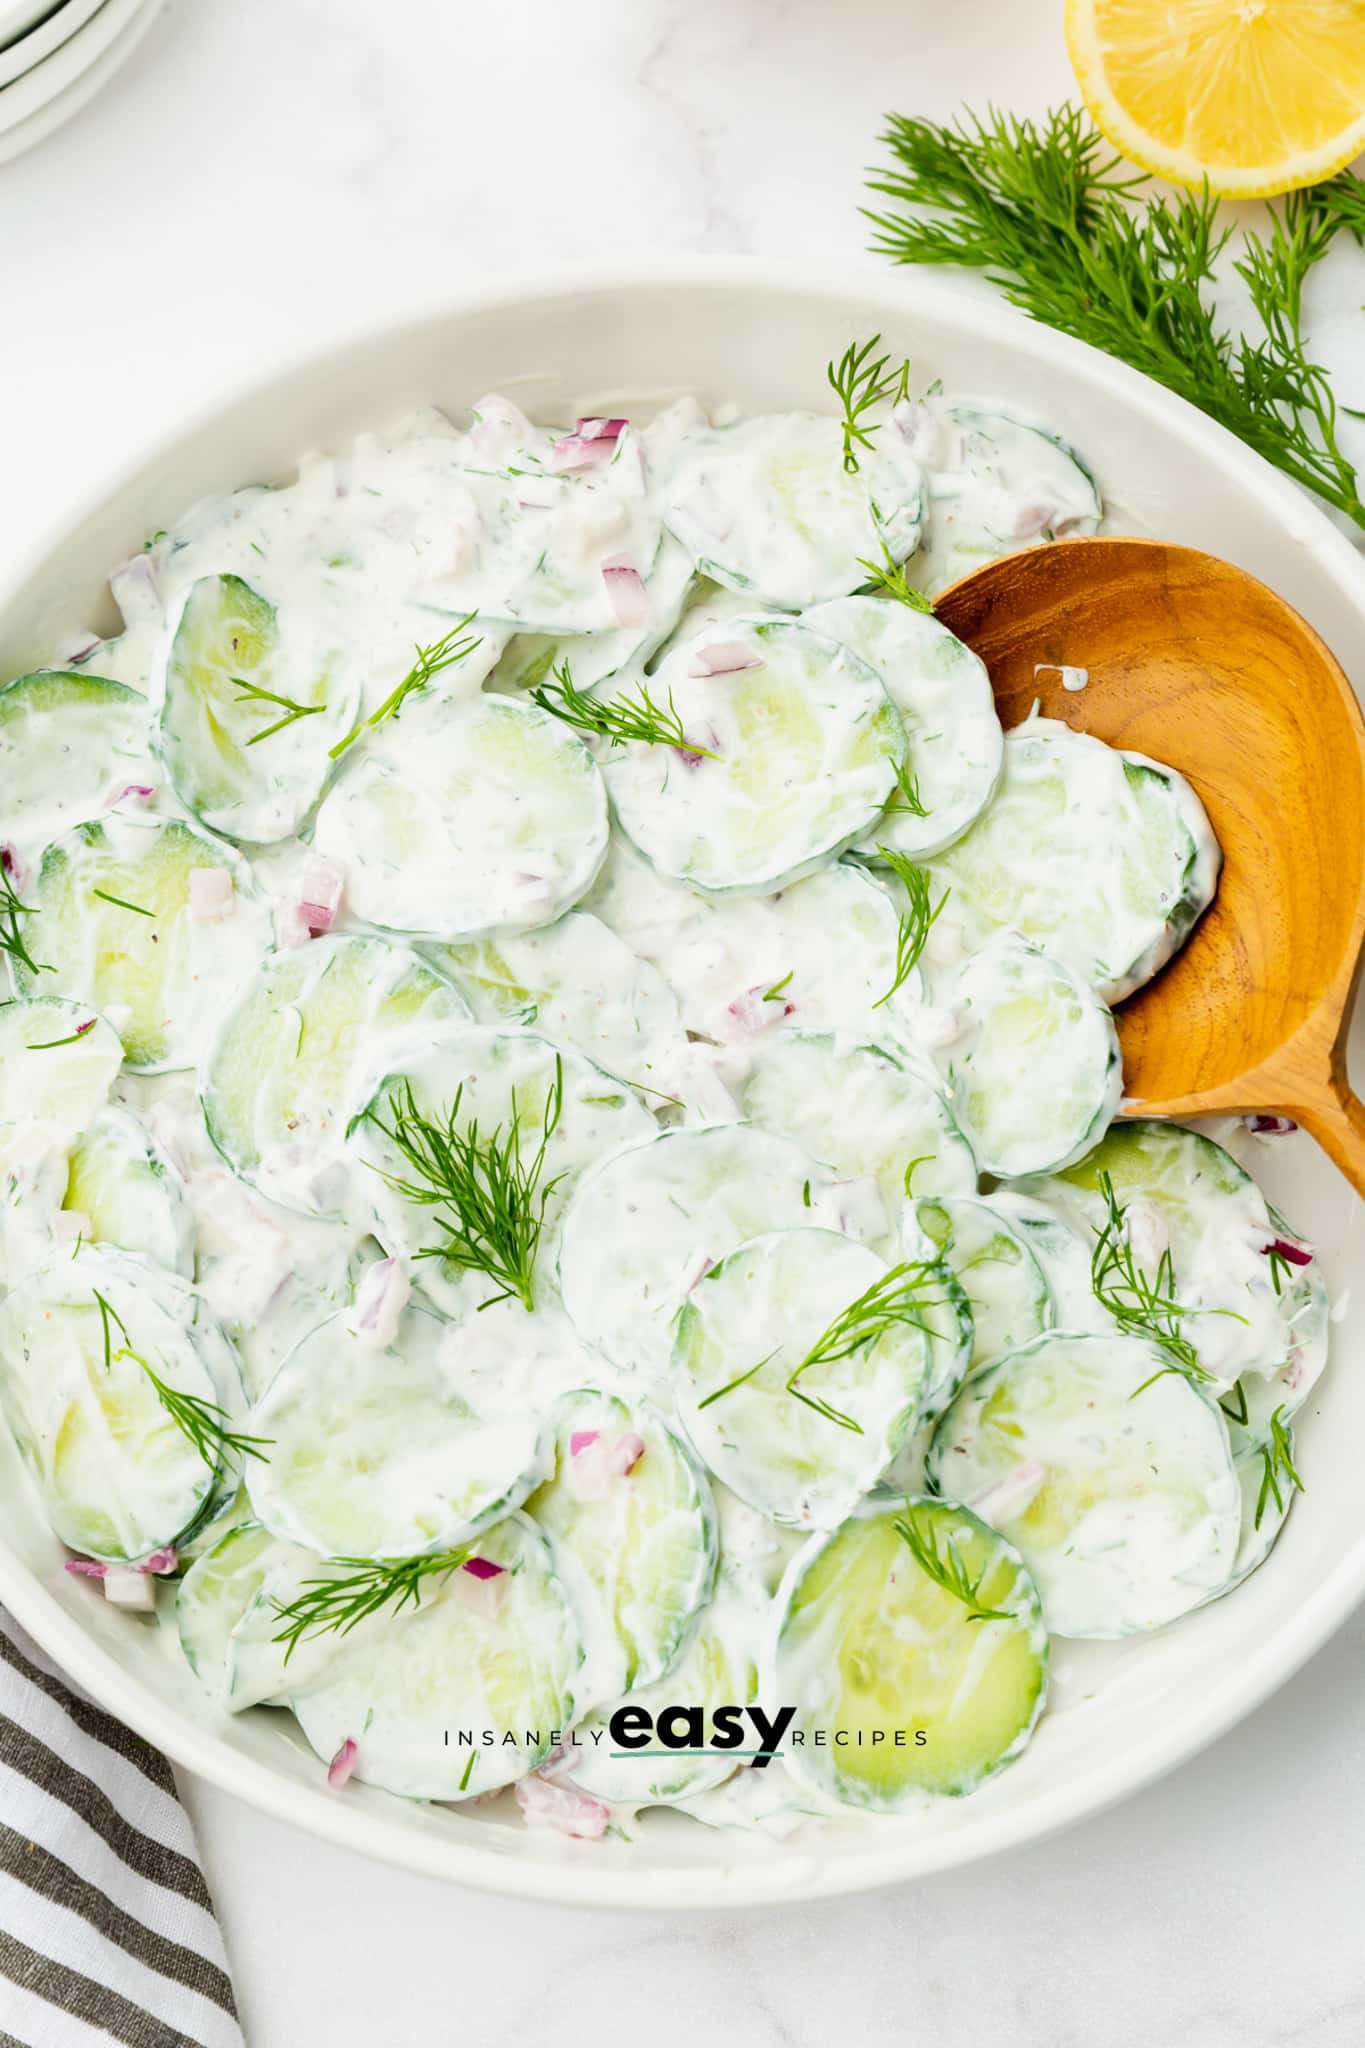 Sliced cucumbers dressed in sour cream for polish cucumber salad. a large wooden spoon is serving the salad, and fresh dill sprigs are sprinkled on.